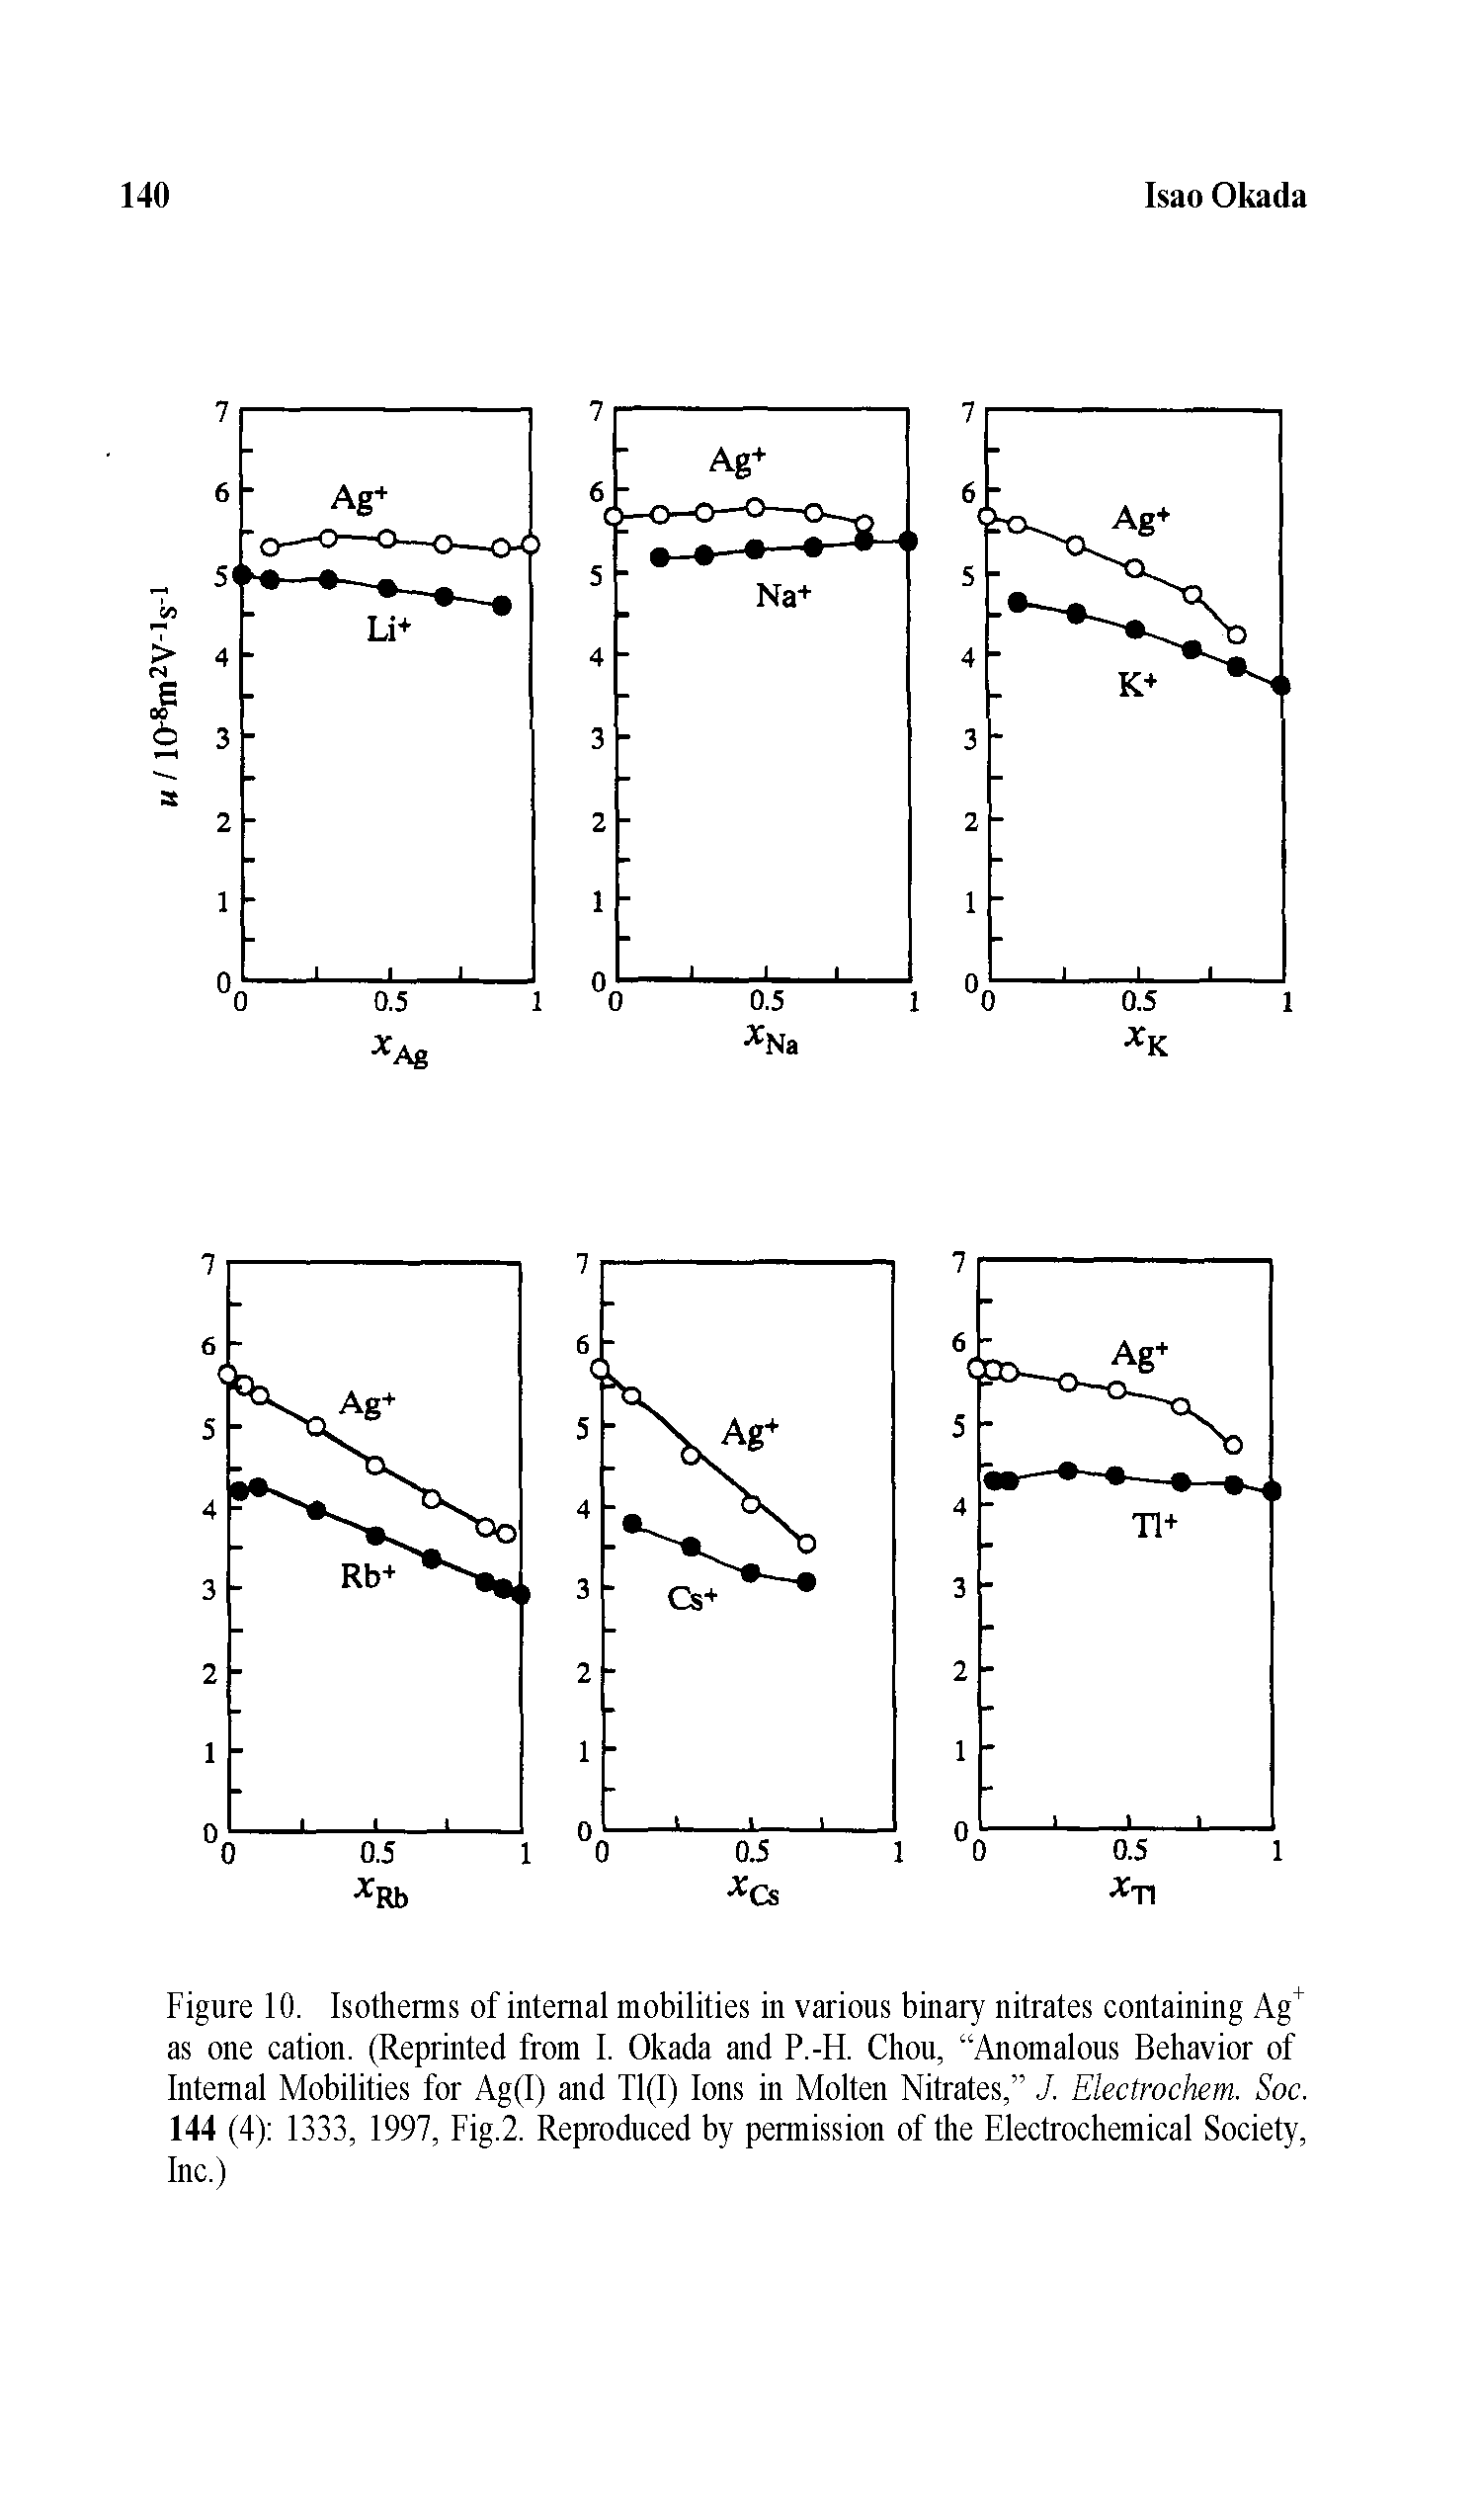 Figure 10. Isotherms of internal mobilities in various binary nitrates containing Ag as one cation. (Reprinted from I. Okada and P.-H. Chou, Anomalous Behavior of Internal Mobilities for Ag(I) and T1(I) Ions in Molten Nitrates, J. Electrochem. Soc. 144 (4) 1333, 1997, Fig.2. Reproduced by permission of the Electrochemical Society, Inc.)...